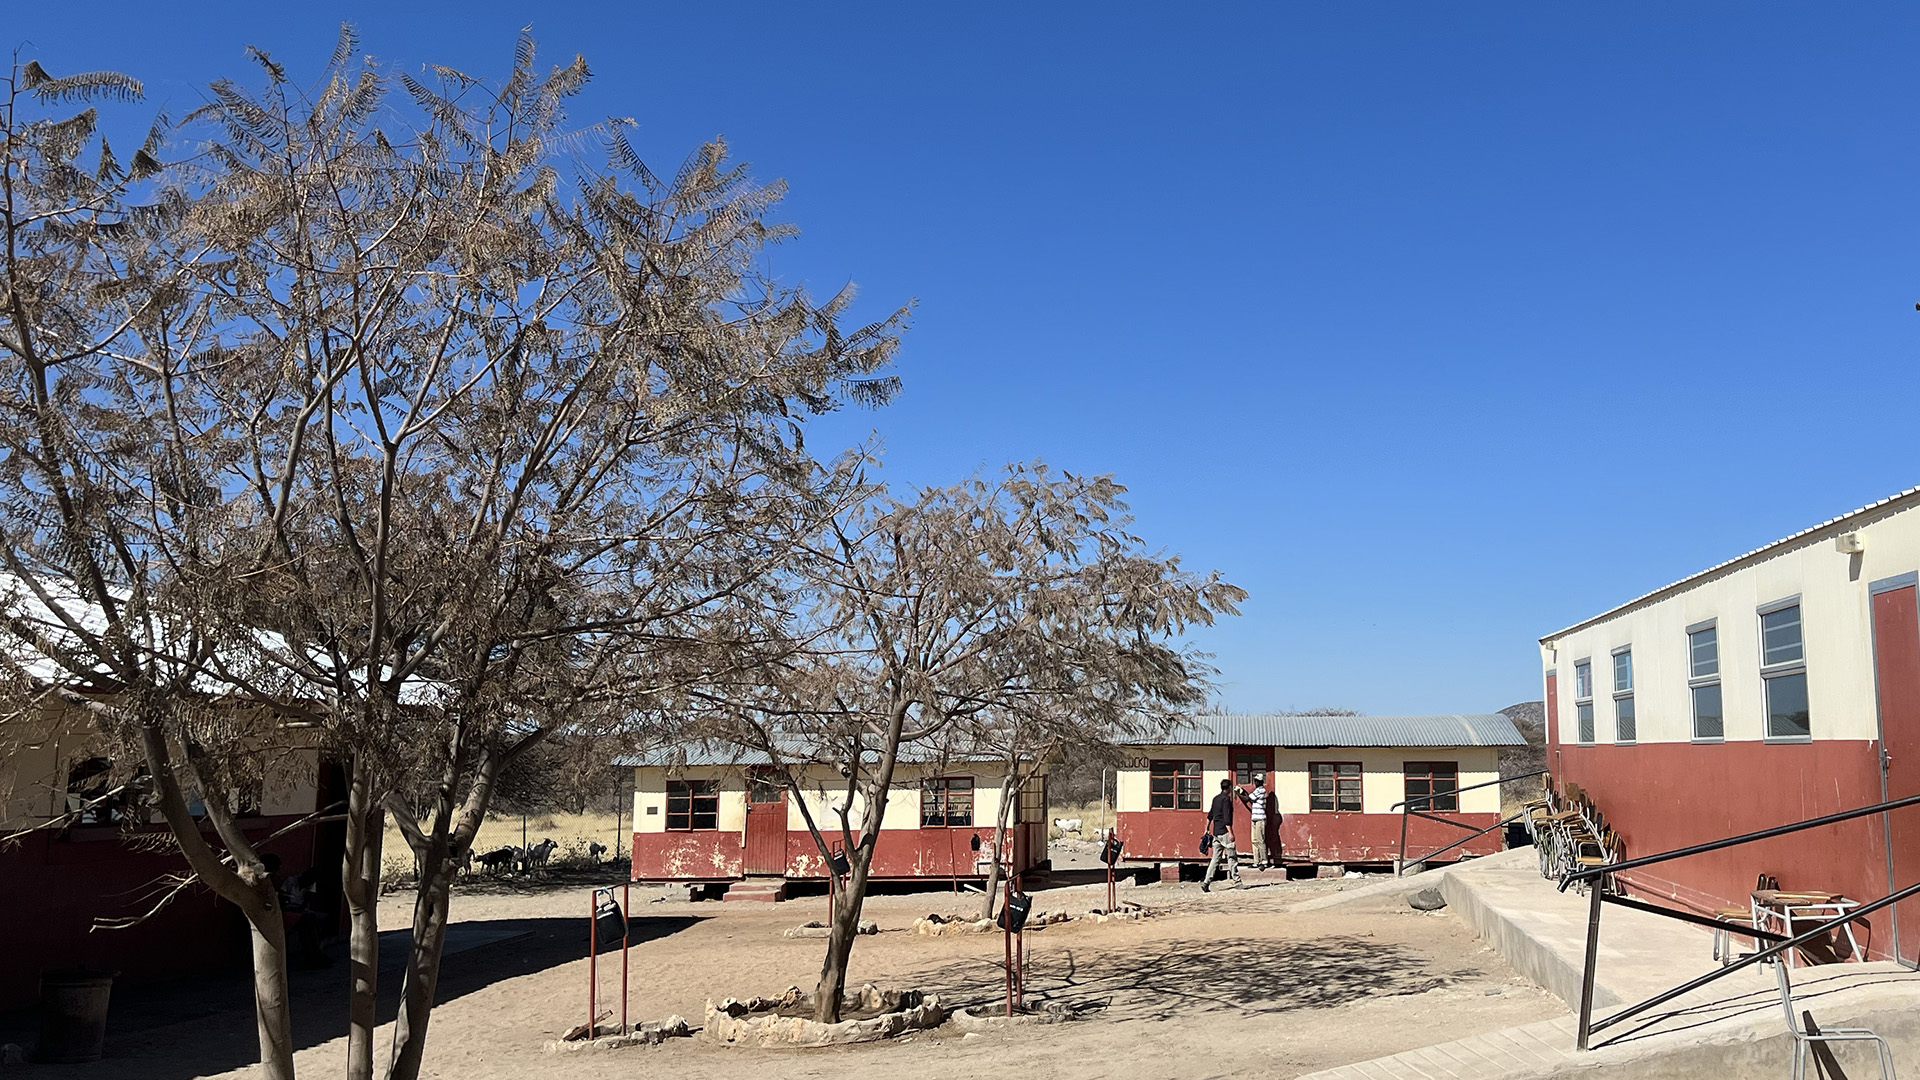 The two classrooms that were moved in march form a beautiful conclusion to the schoolyard...